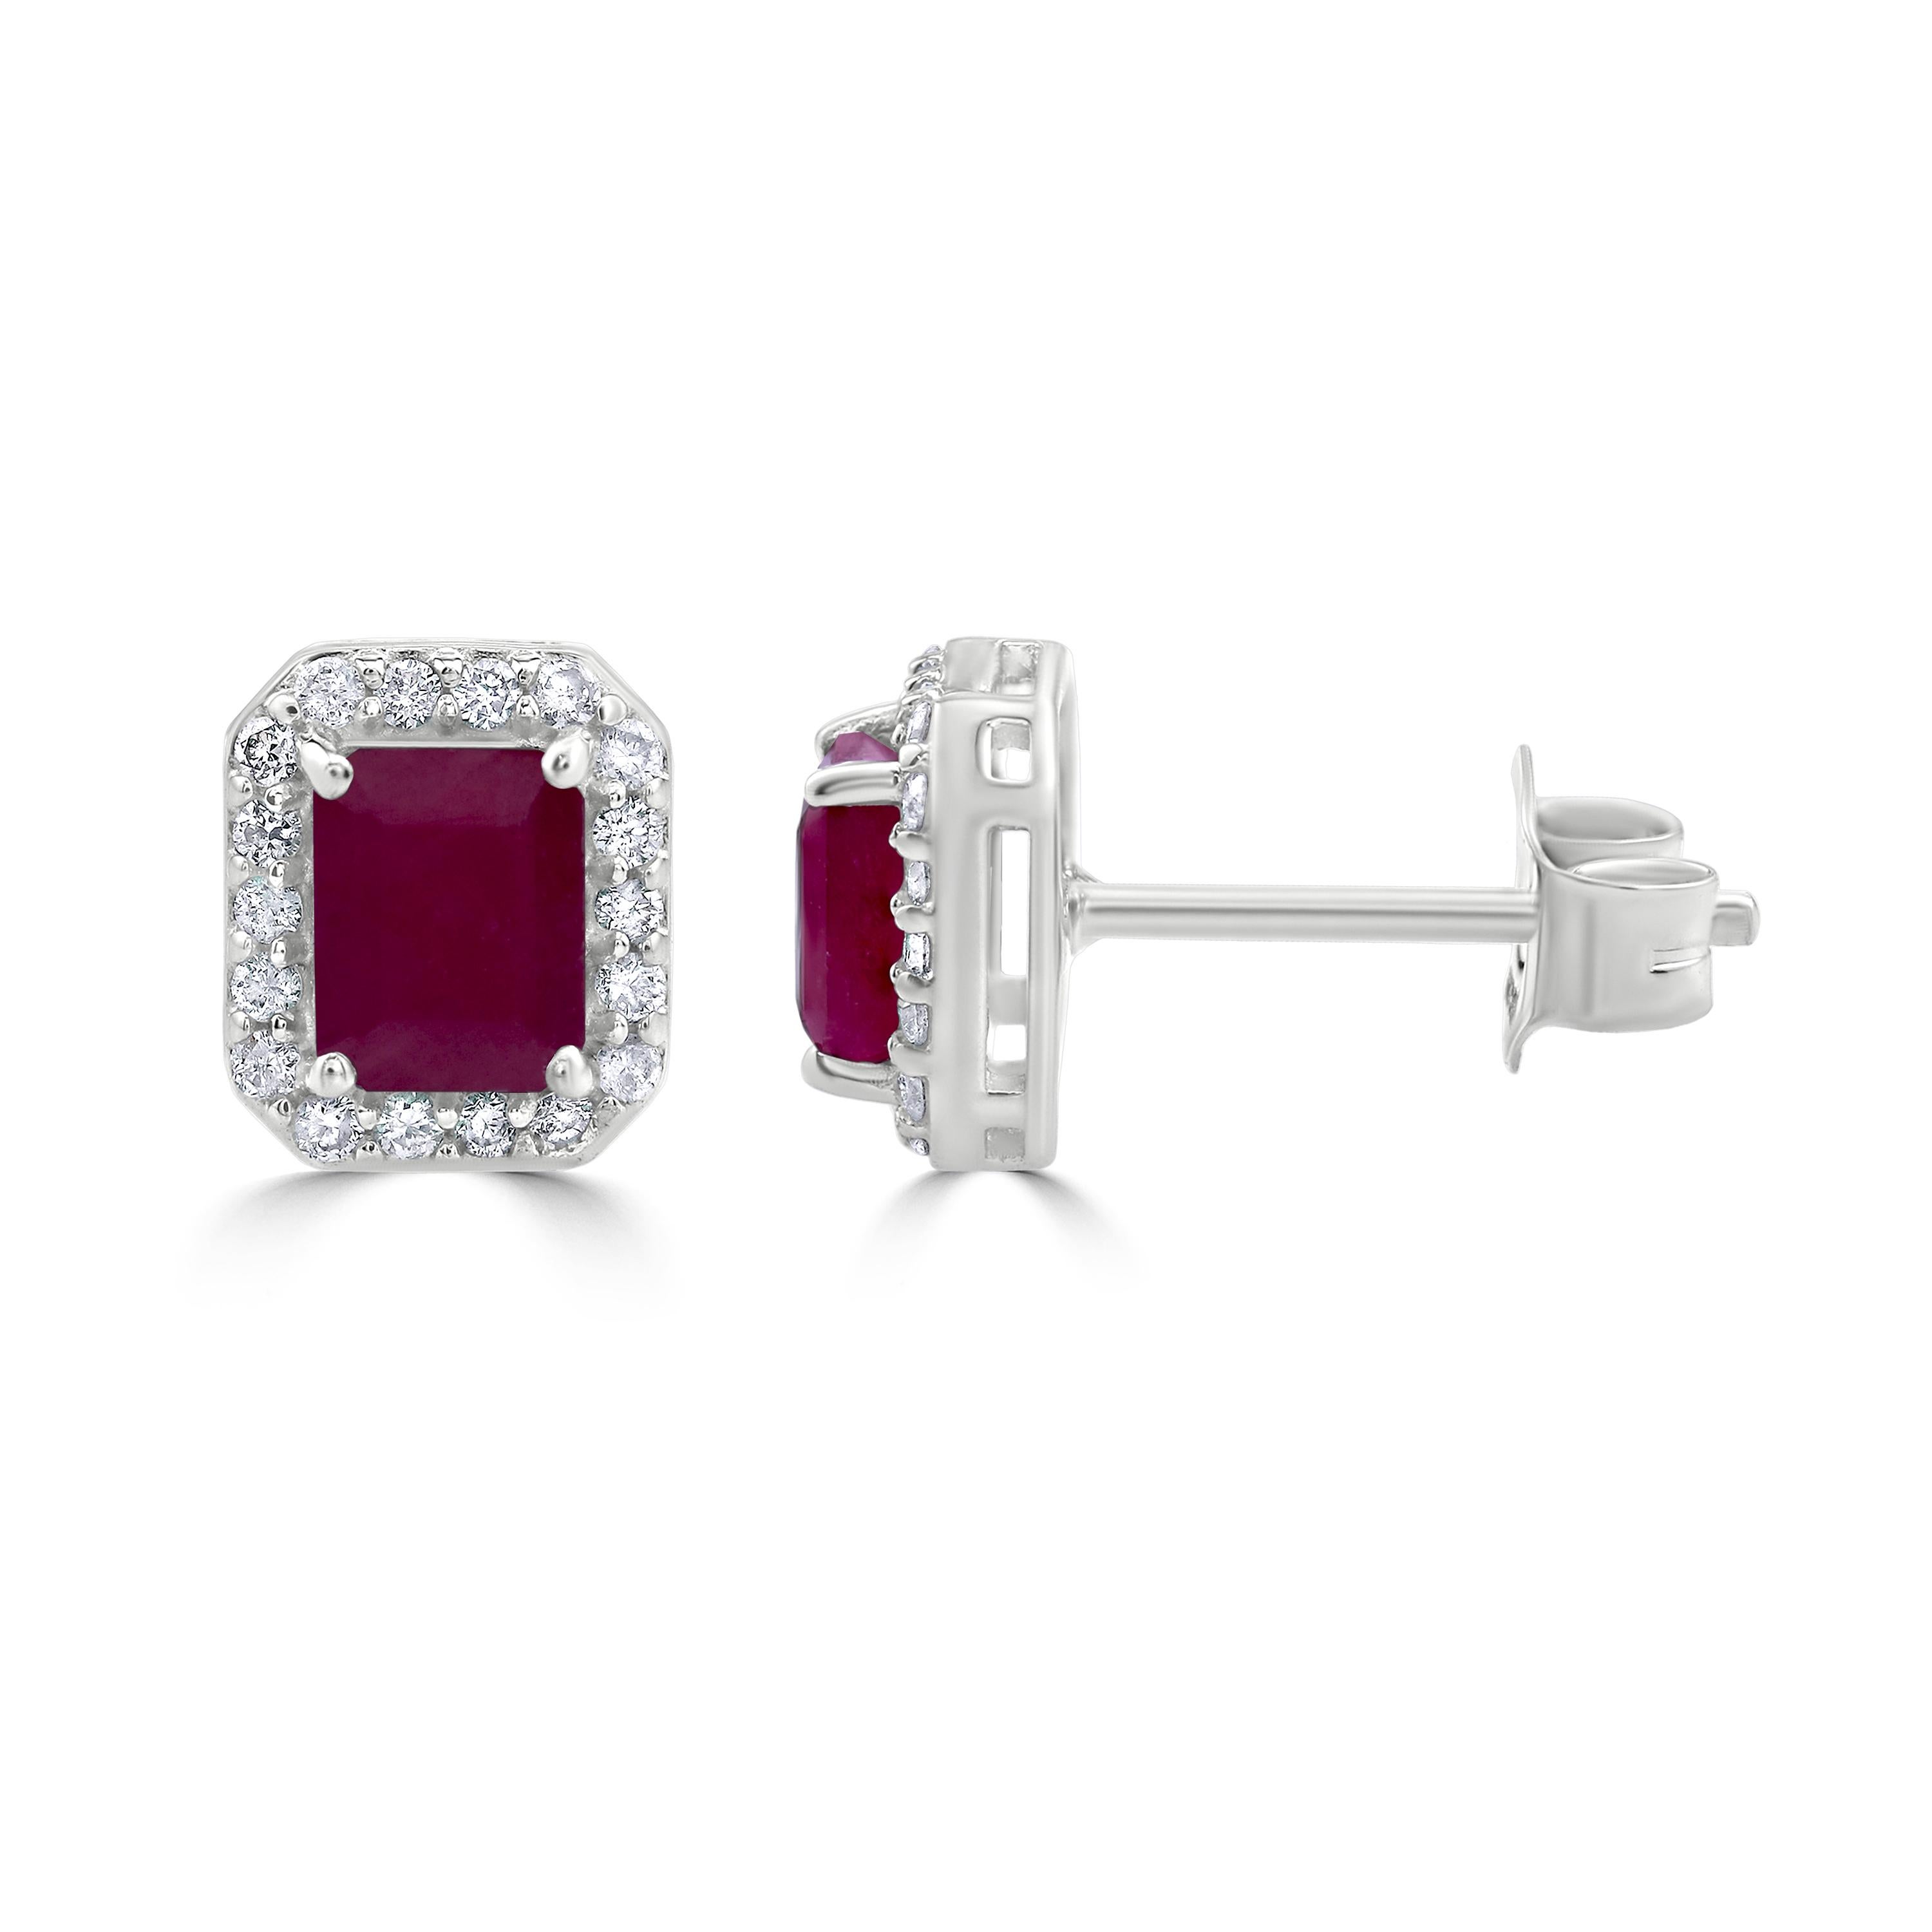 Contemporary Gemistry 1.45 Carats Octagon Ruby Stud Earrings with Diamond in 14K White Gold For Sale